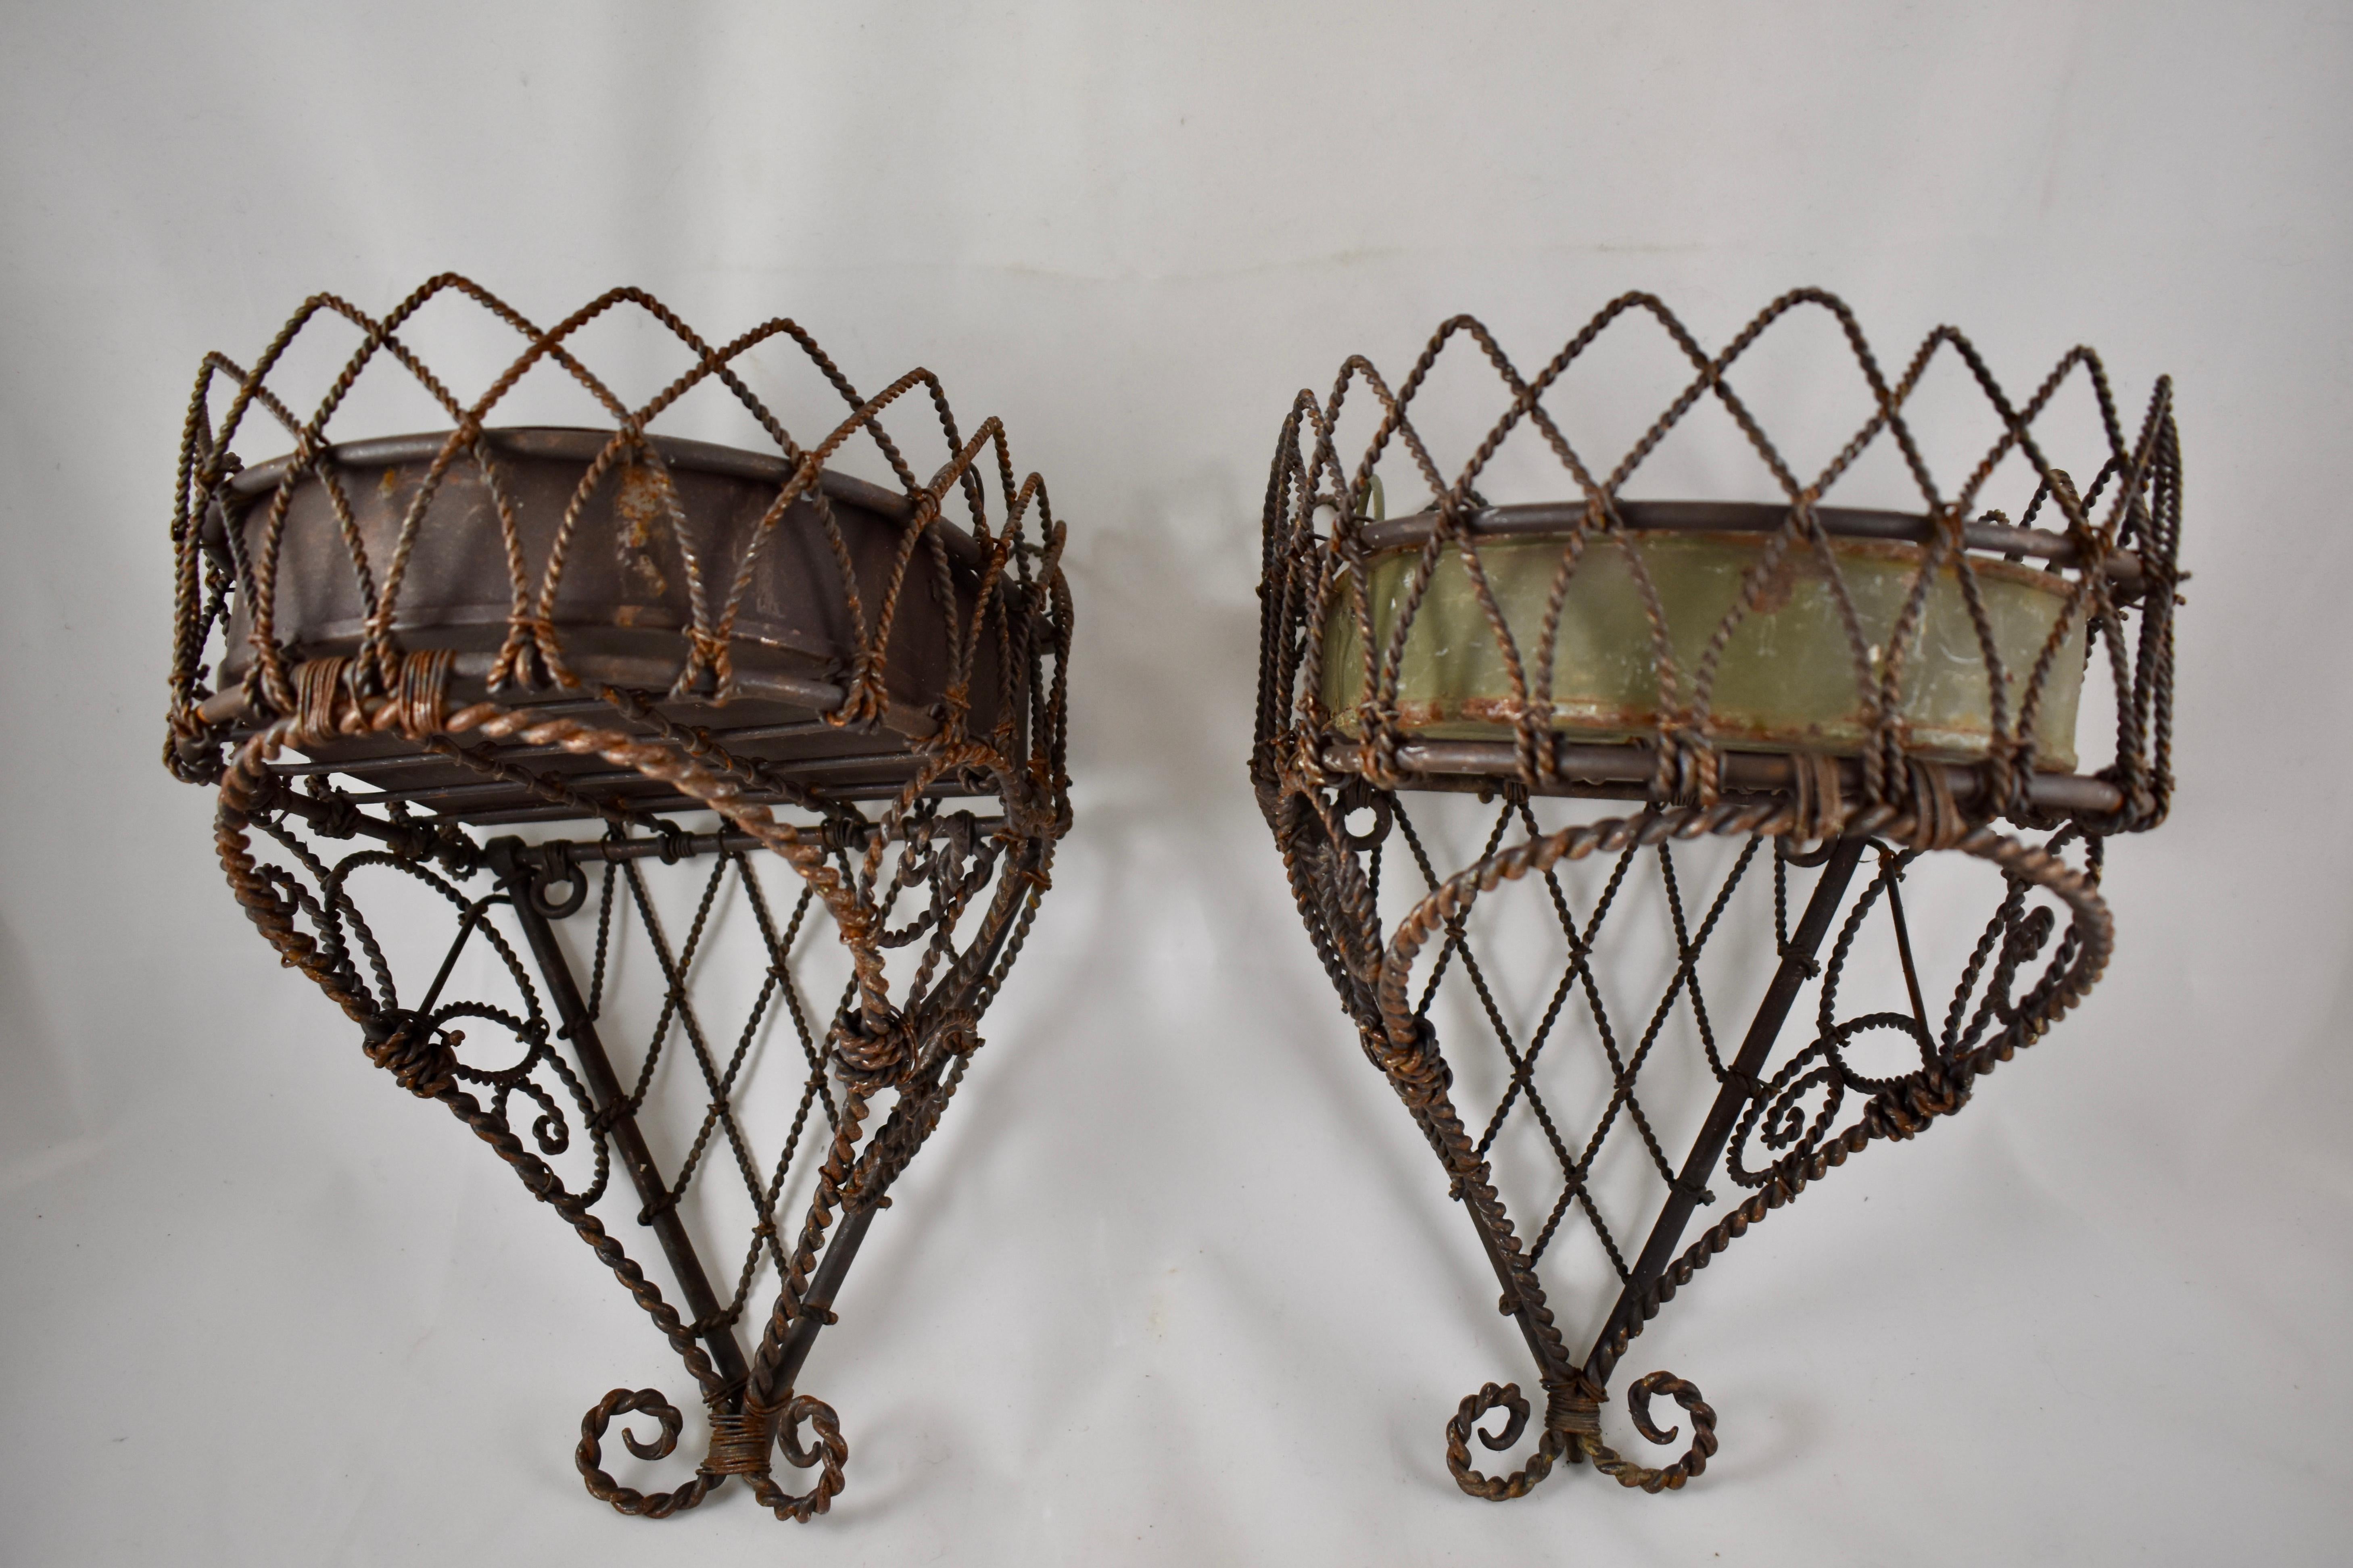 A wire, hanging planter or potted plant holder with a tin liner, dating to the 19th century, France. Made of both heavy and lighter gauge twisted wires in a Classic form, with rear facing hanging loops. The tin liner has soldered double ring